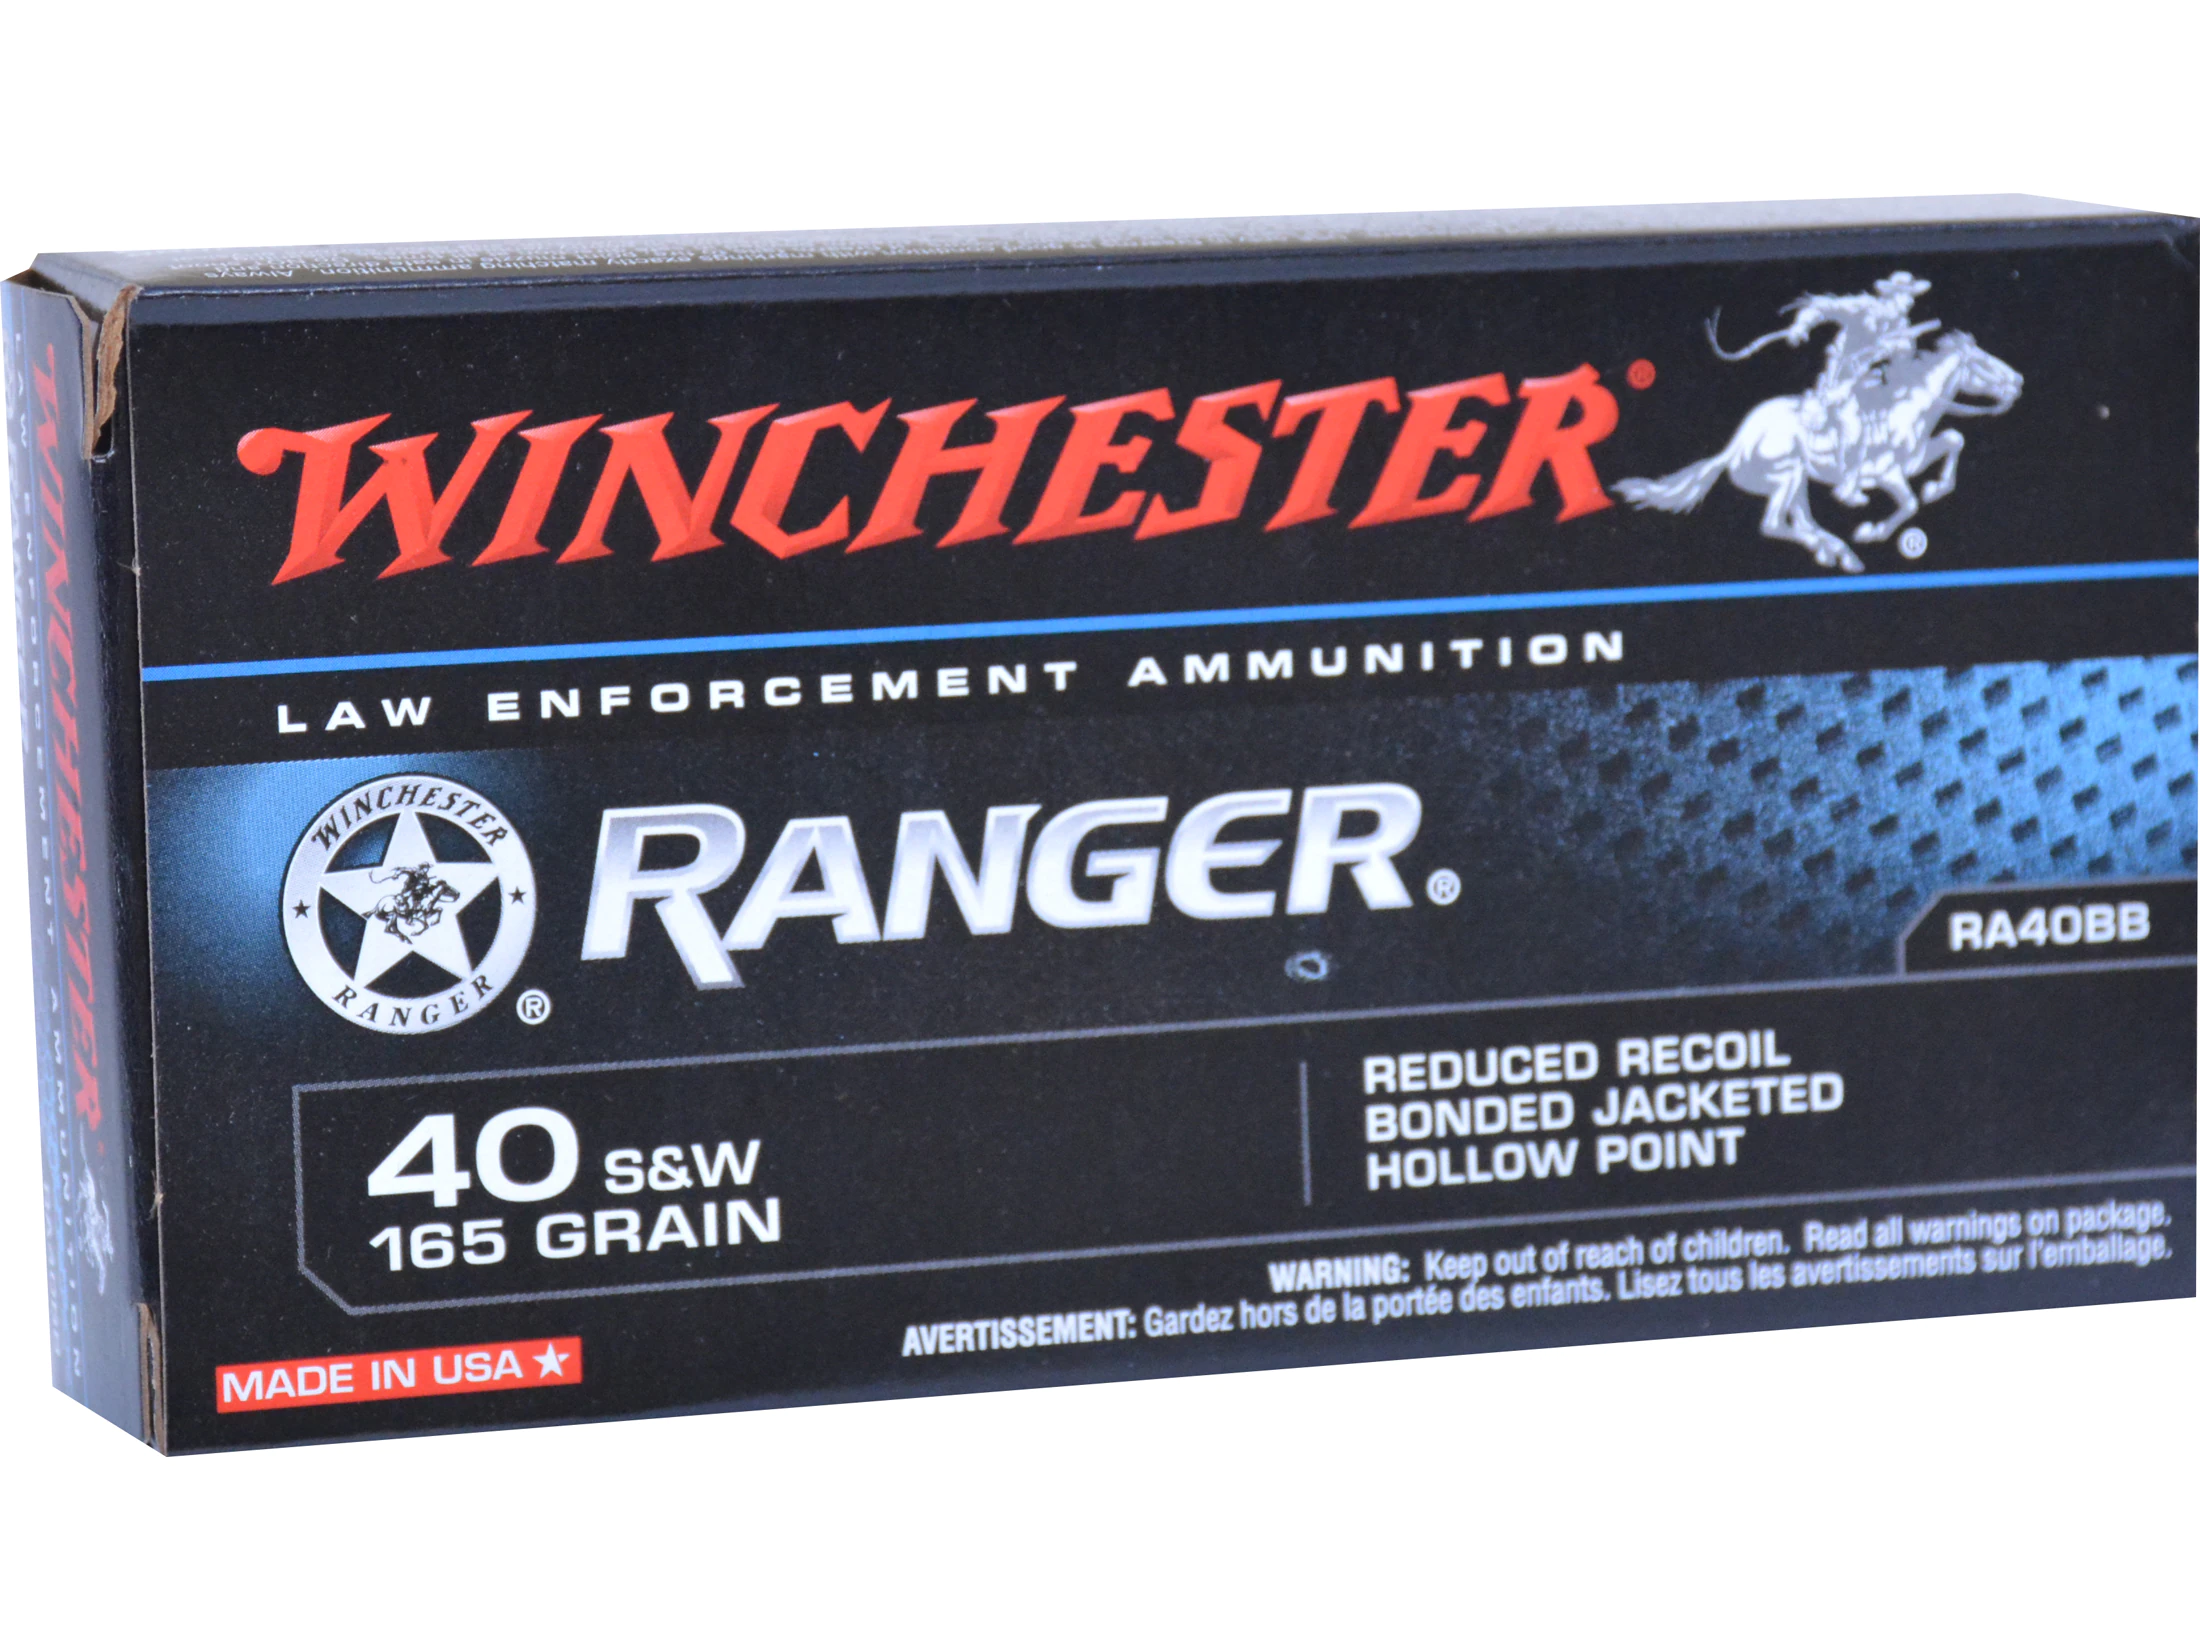 Image of Winchester Ranger Ammunition 40 S&W 165 Grain Bonded Hollow Point Box of 50